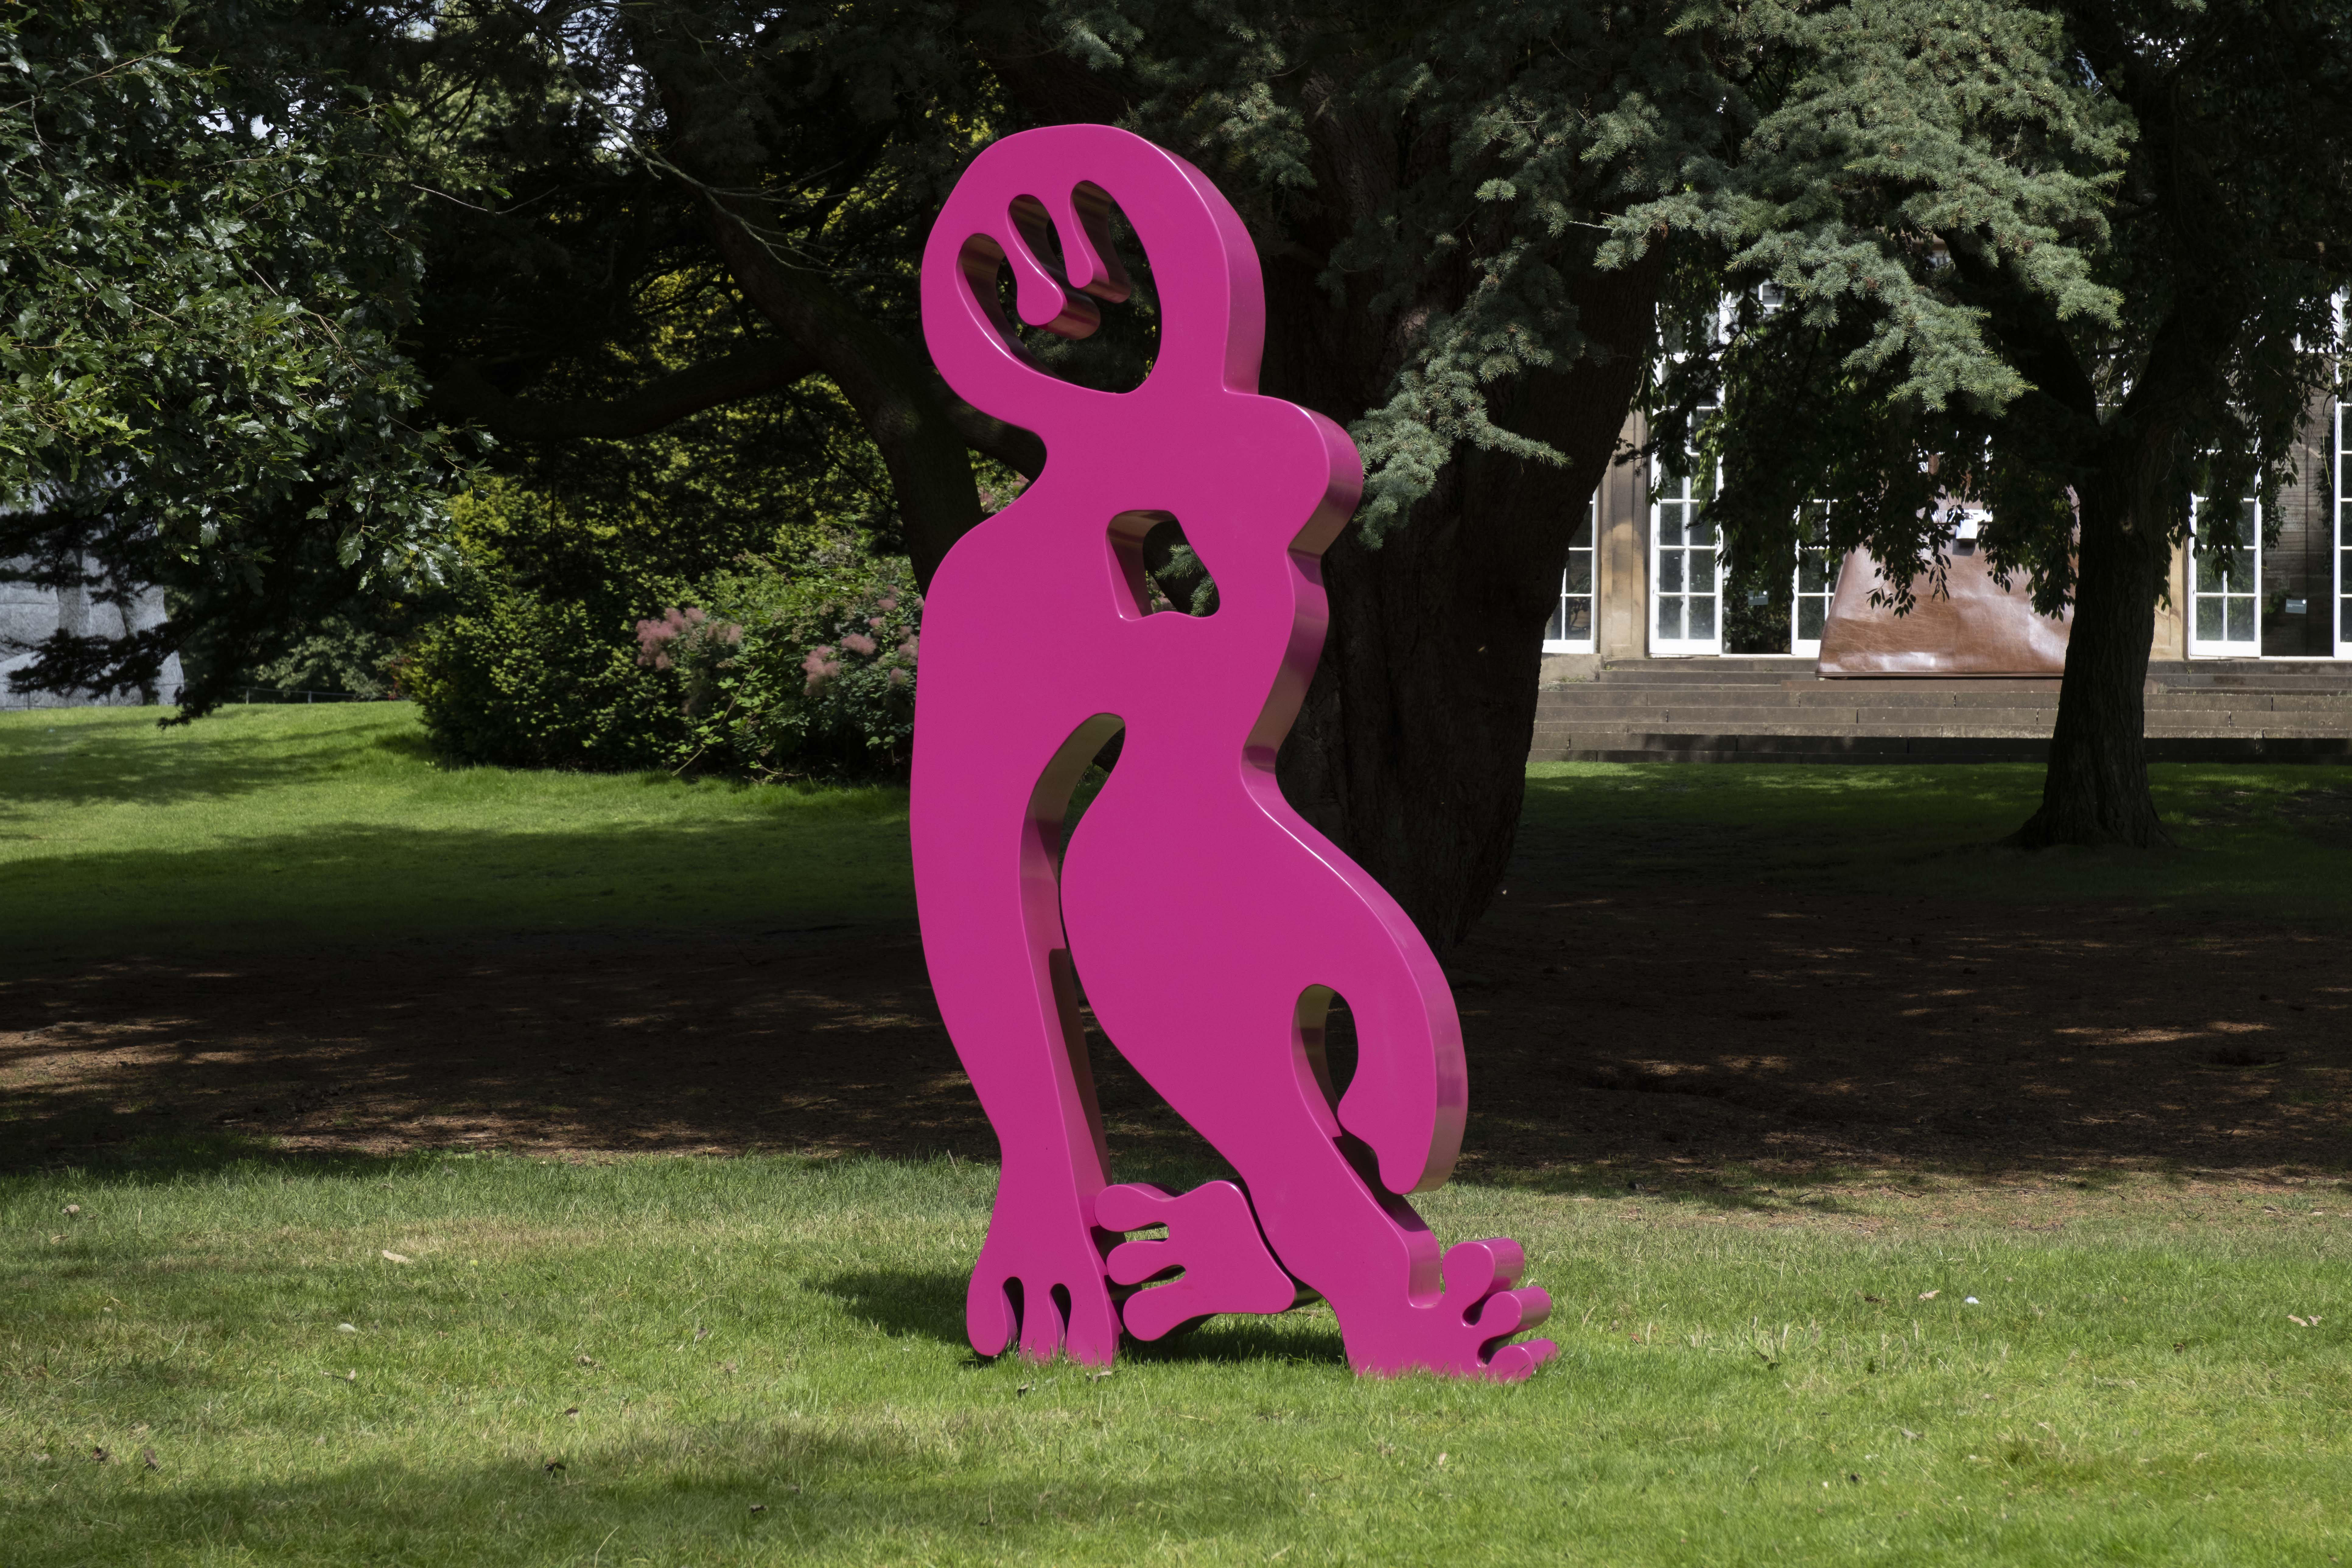 A bright pink abstract sculpture